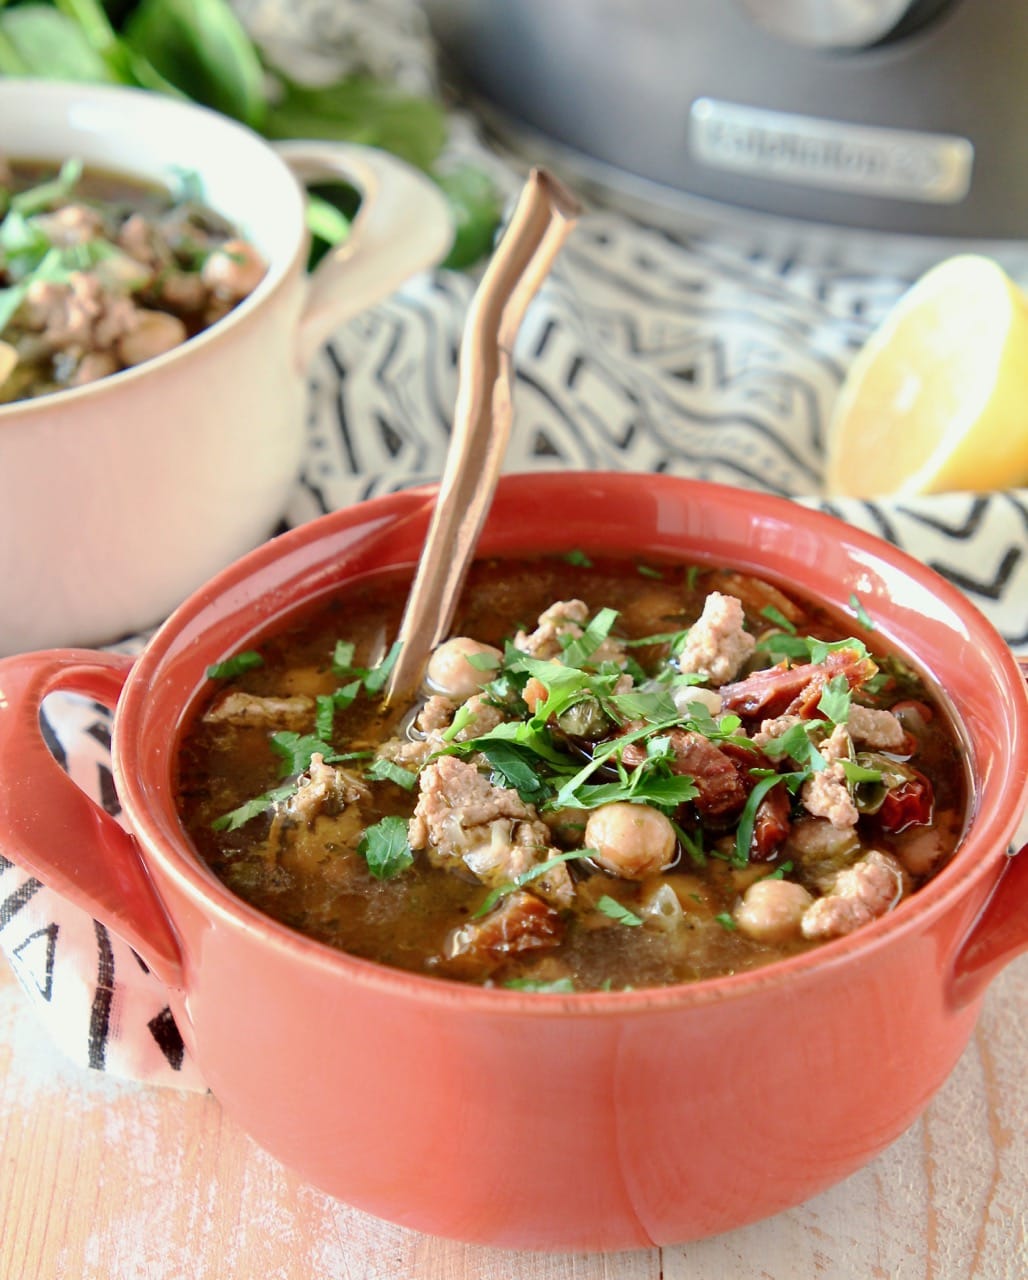 Greek turkey soup with chickpeas and spinach in orange bowl with copper spoon